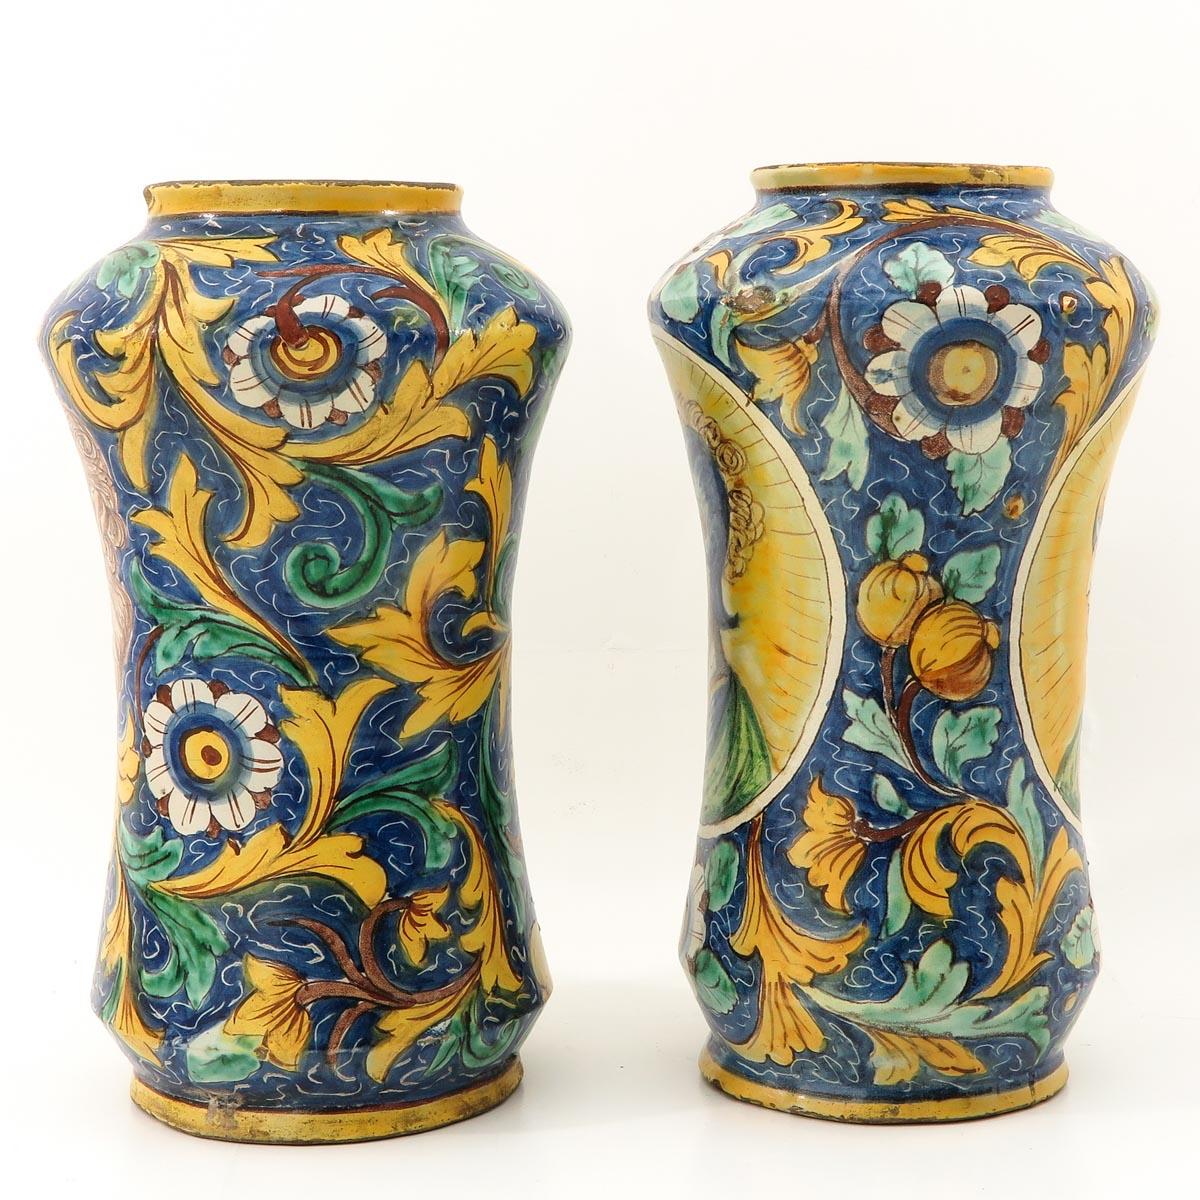 A Pair of 17th Century Italian Apothecary Jars - Image 2 of 9